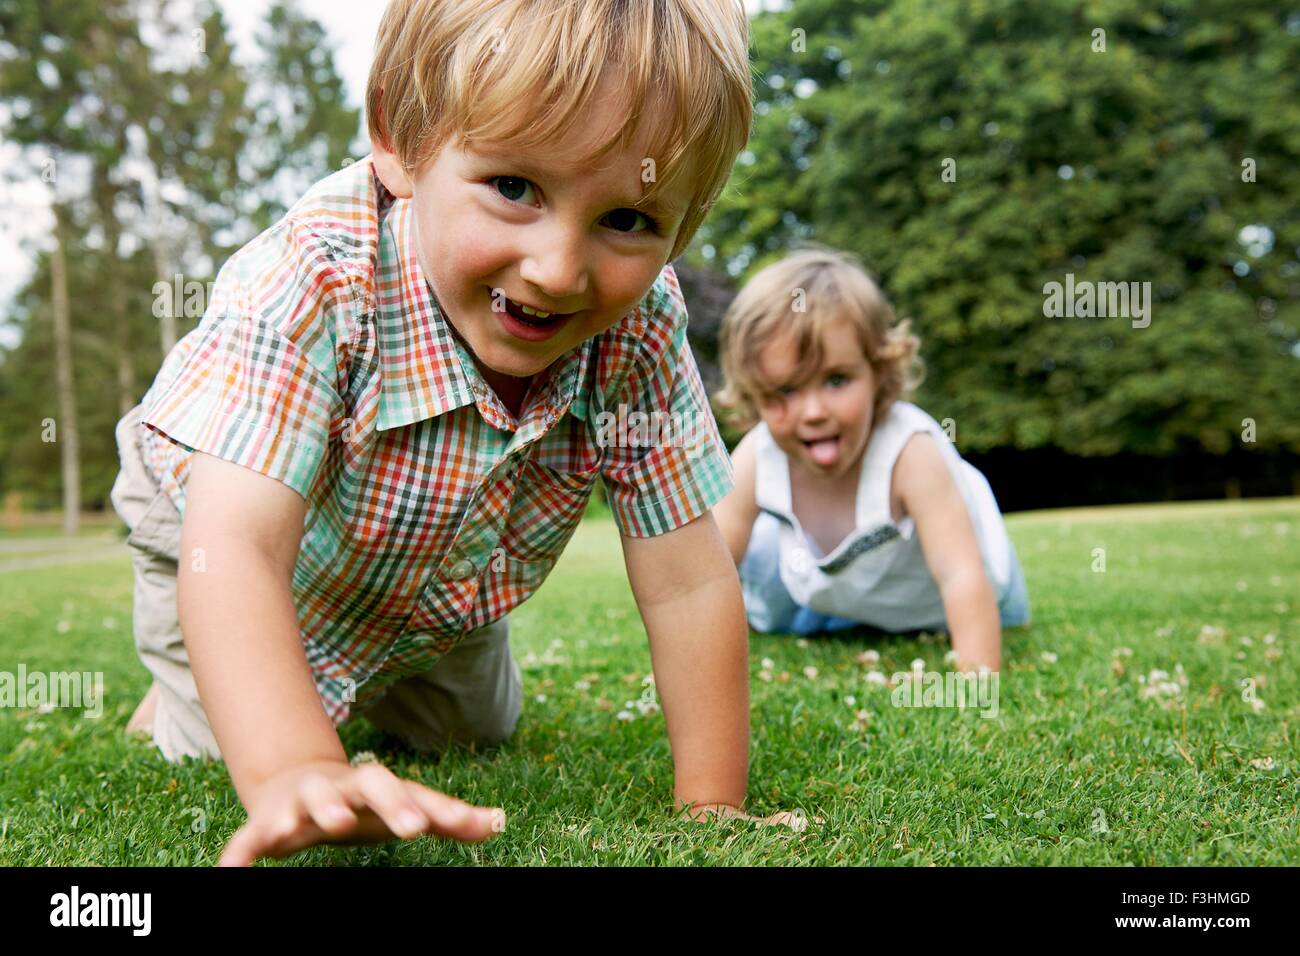 Boy and girl on grass crawling on hands and knees, looking at camera smiling Stock Photo